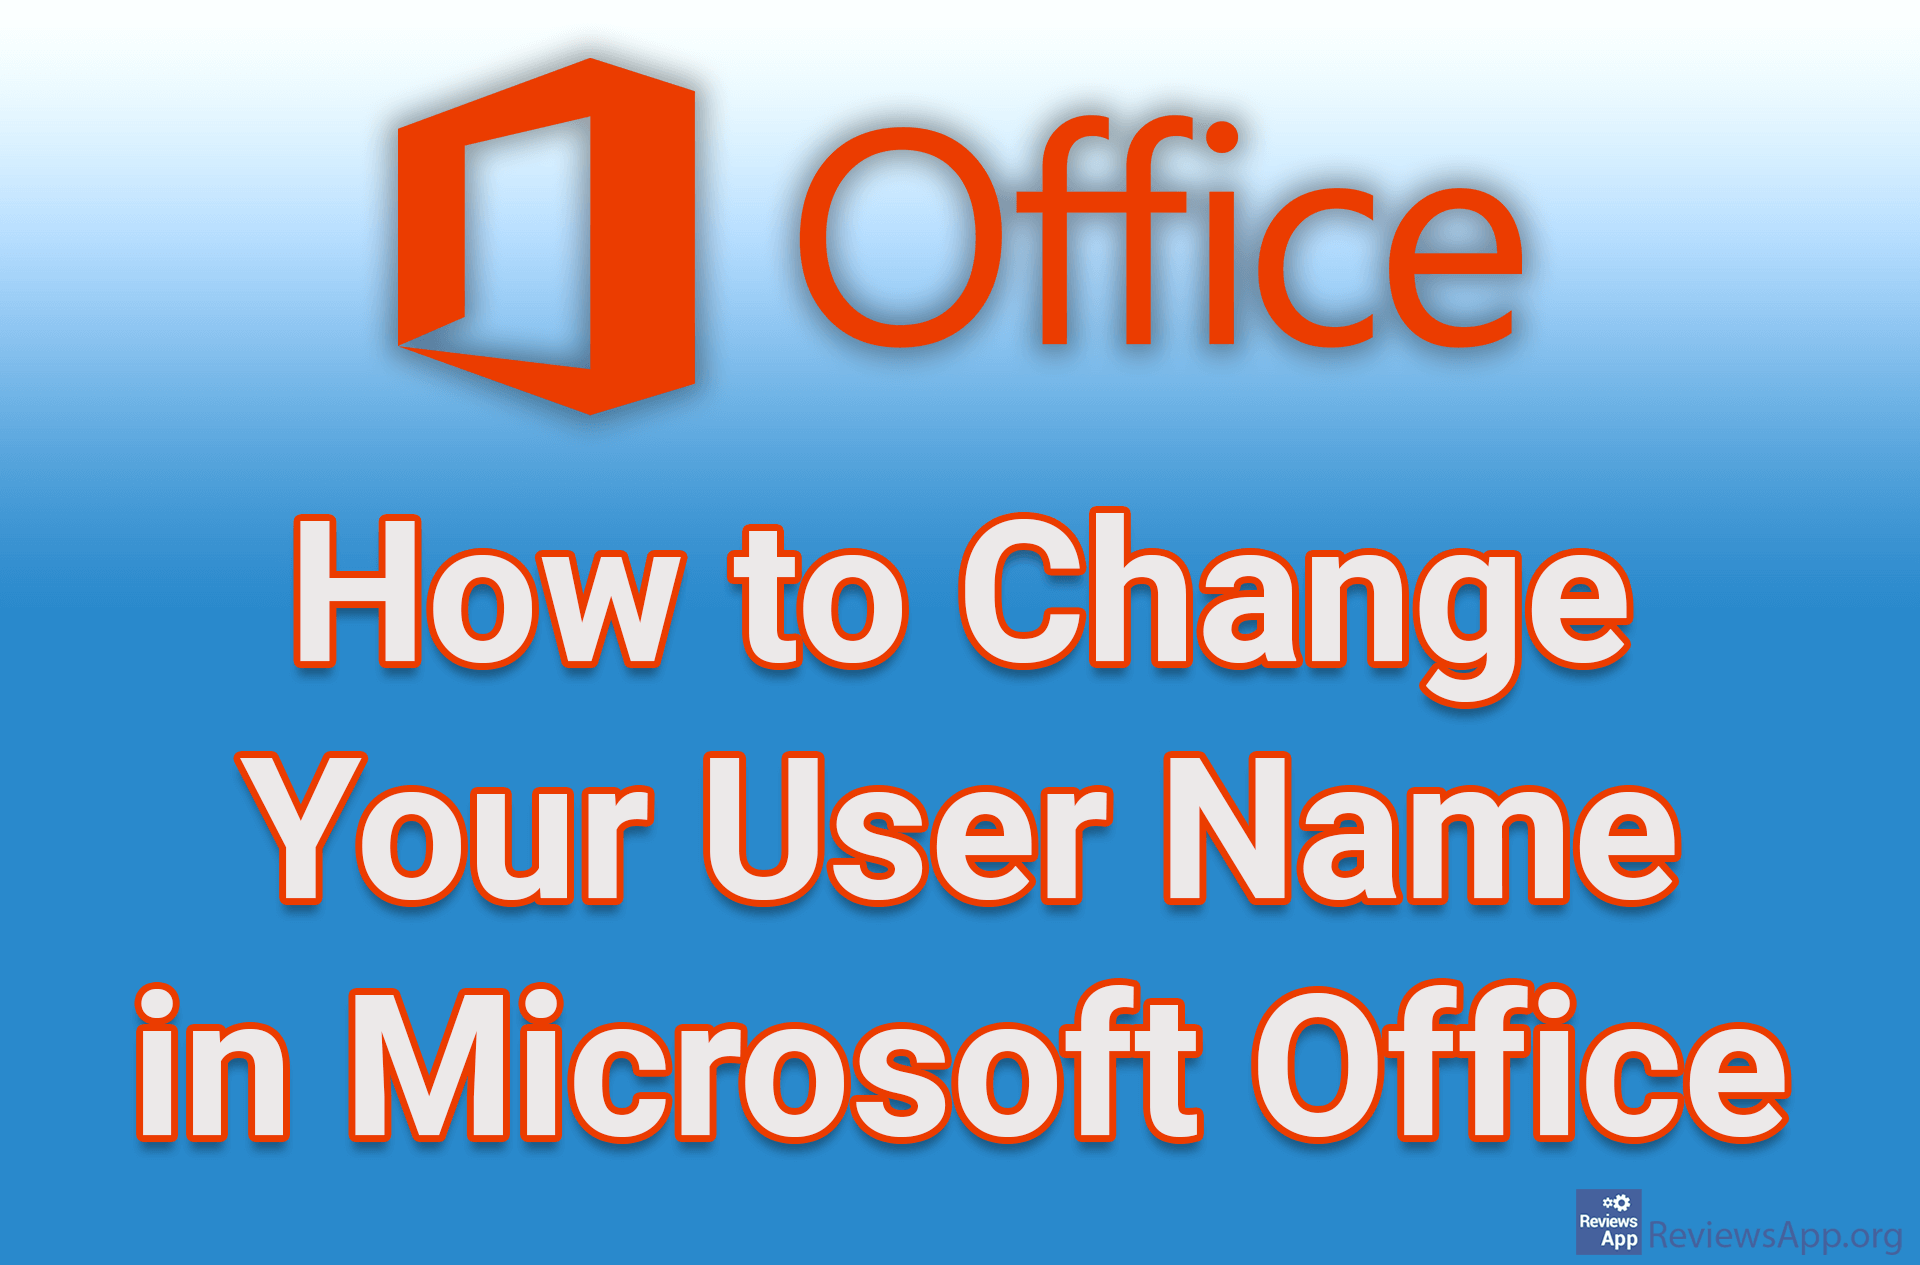 How to Change Your User Name in Microsoft Office